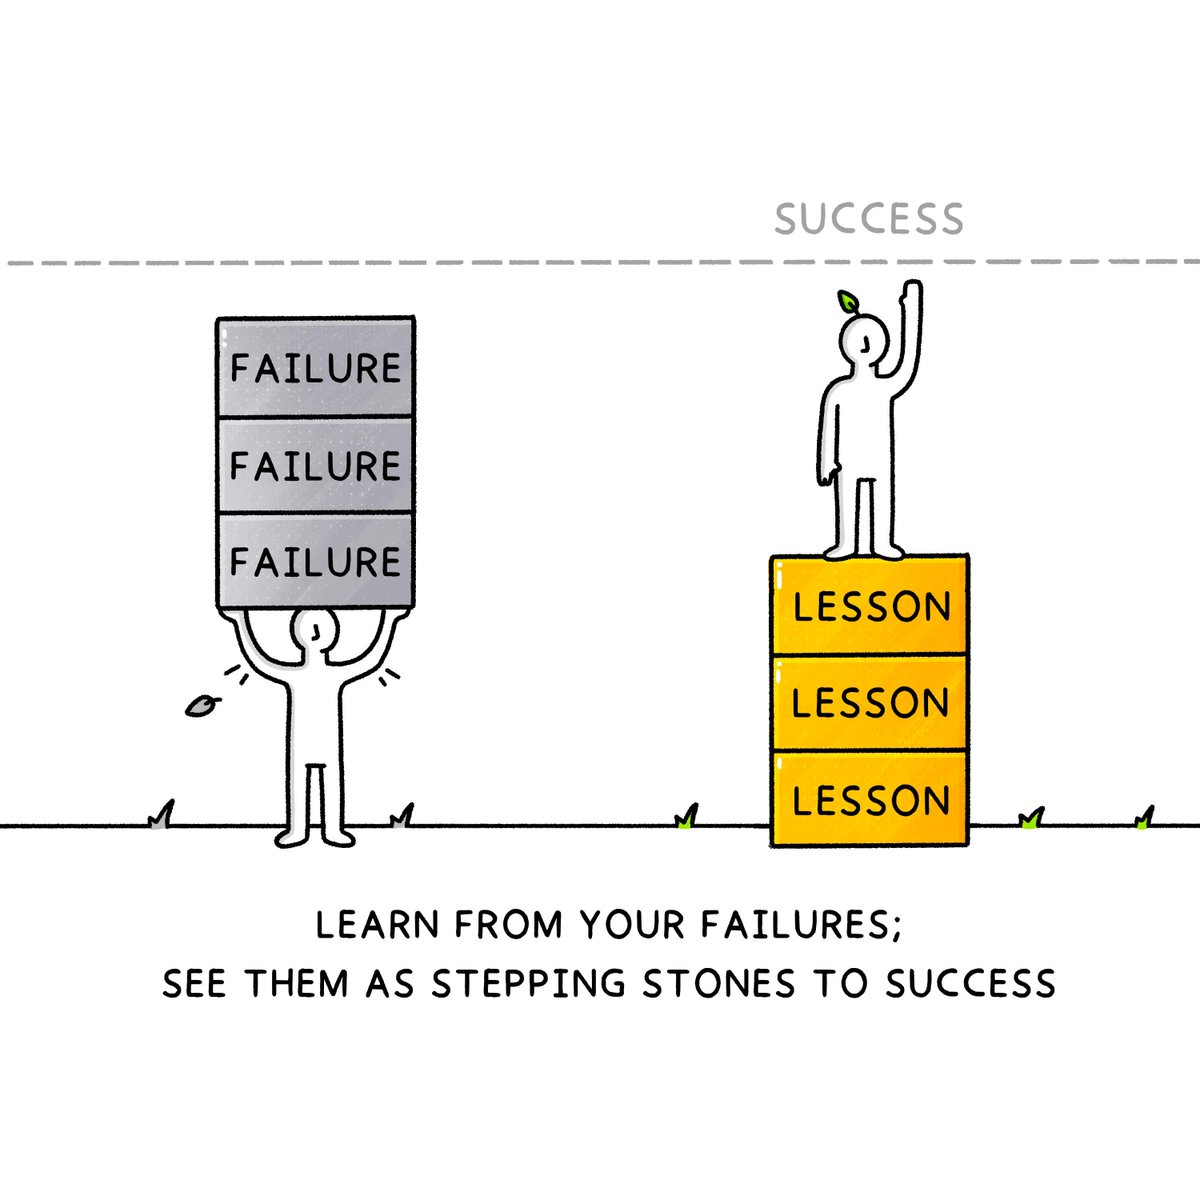 For those who want to build their own startup/business, this visual is important  

#StartupJourney #EntrepreneurLife #BusinessSuccess #FailureToSuccess #ResilientEntrepreneur #LearnAndGrow #StartupMindset #EmbraceFailure #SuccessStrategies #NeverGiveUp #BusinessGrowth